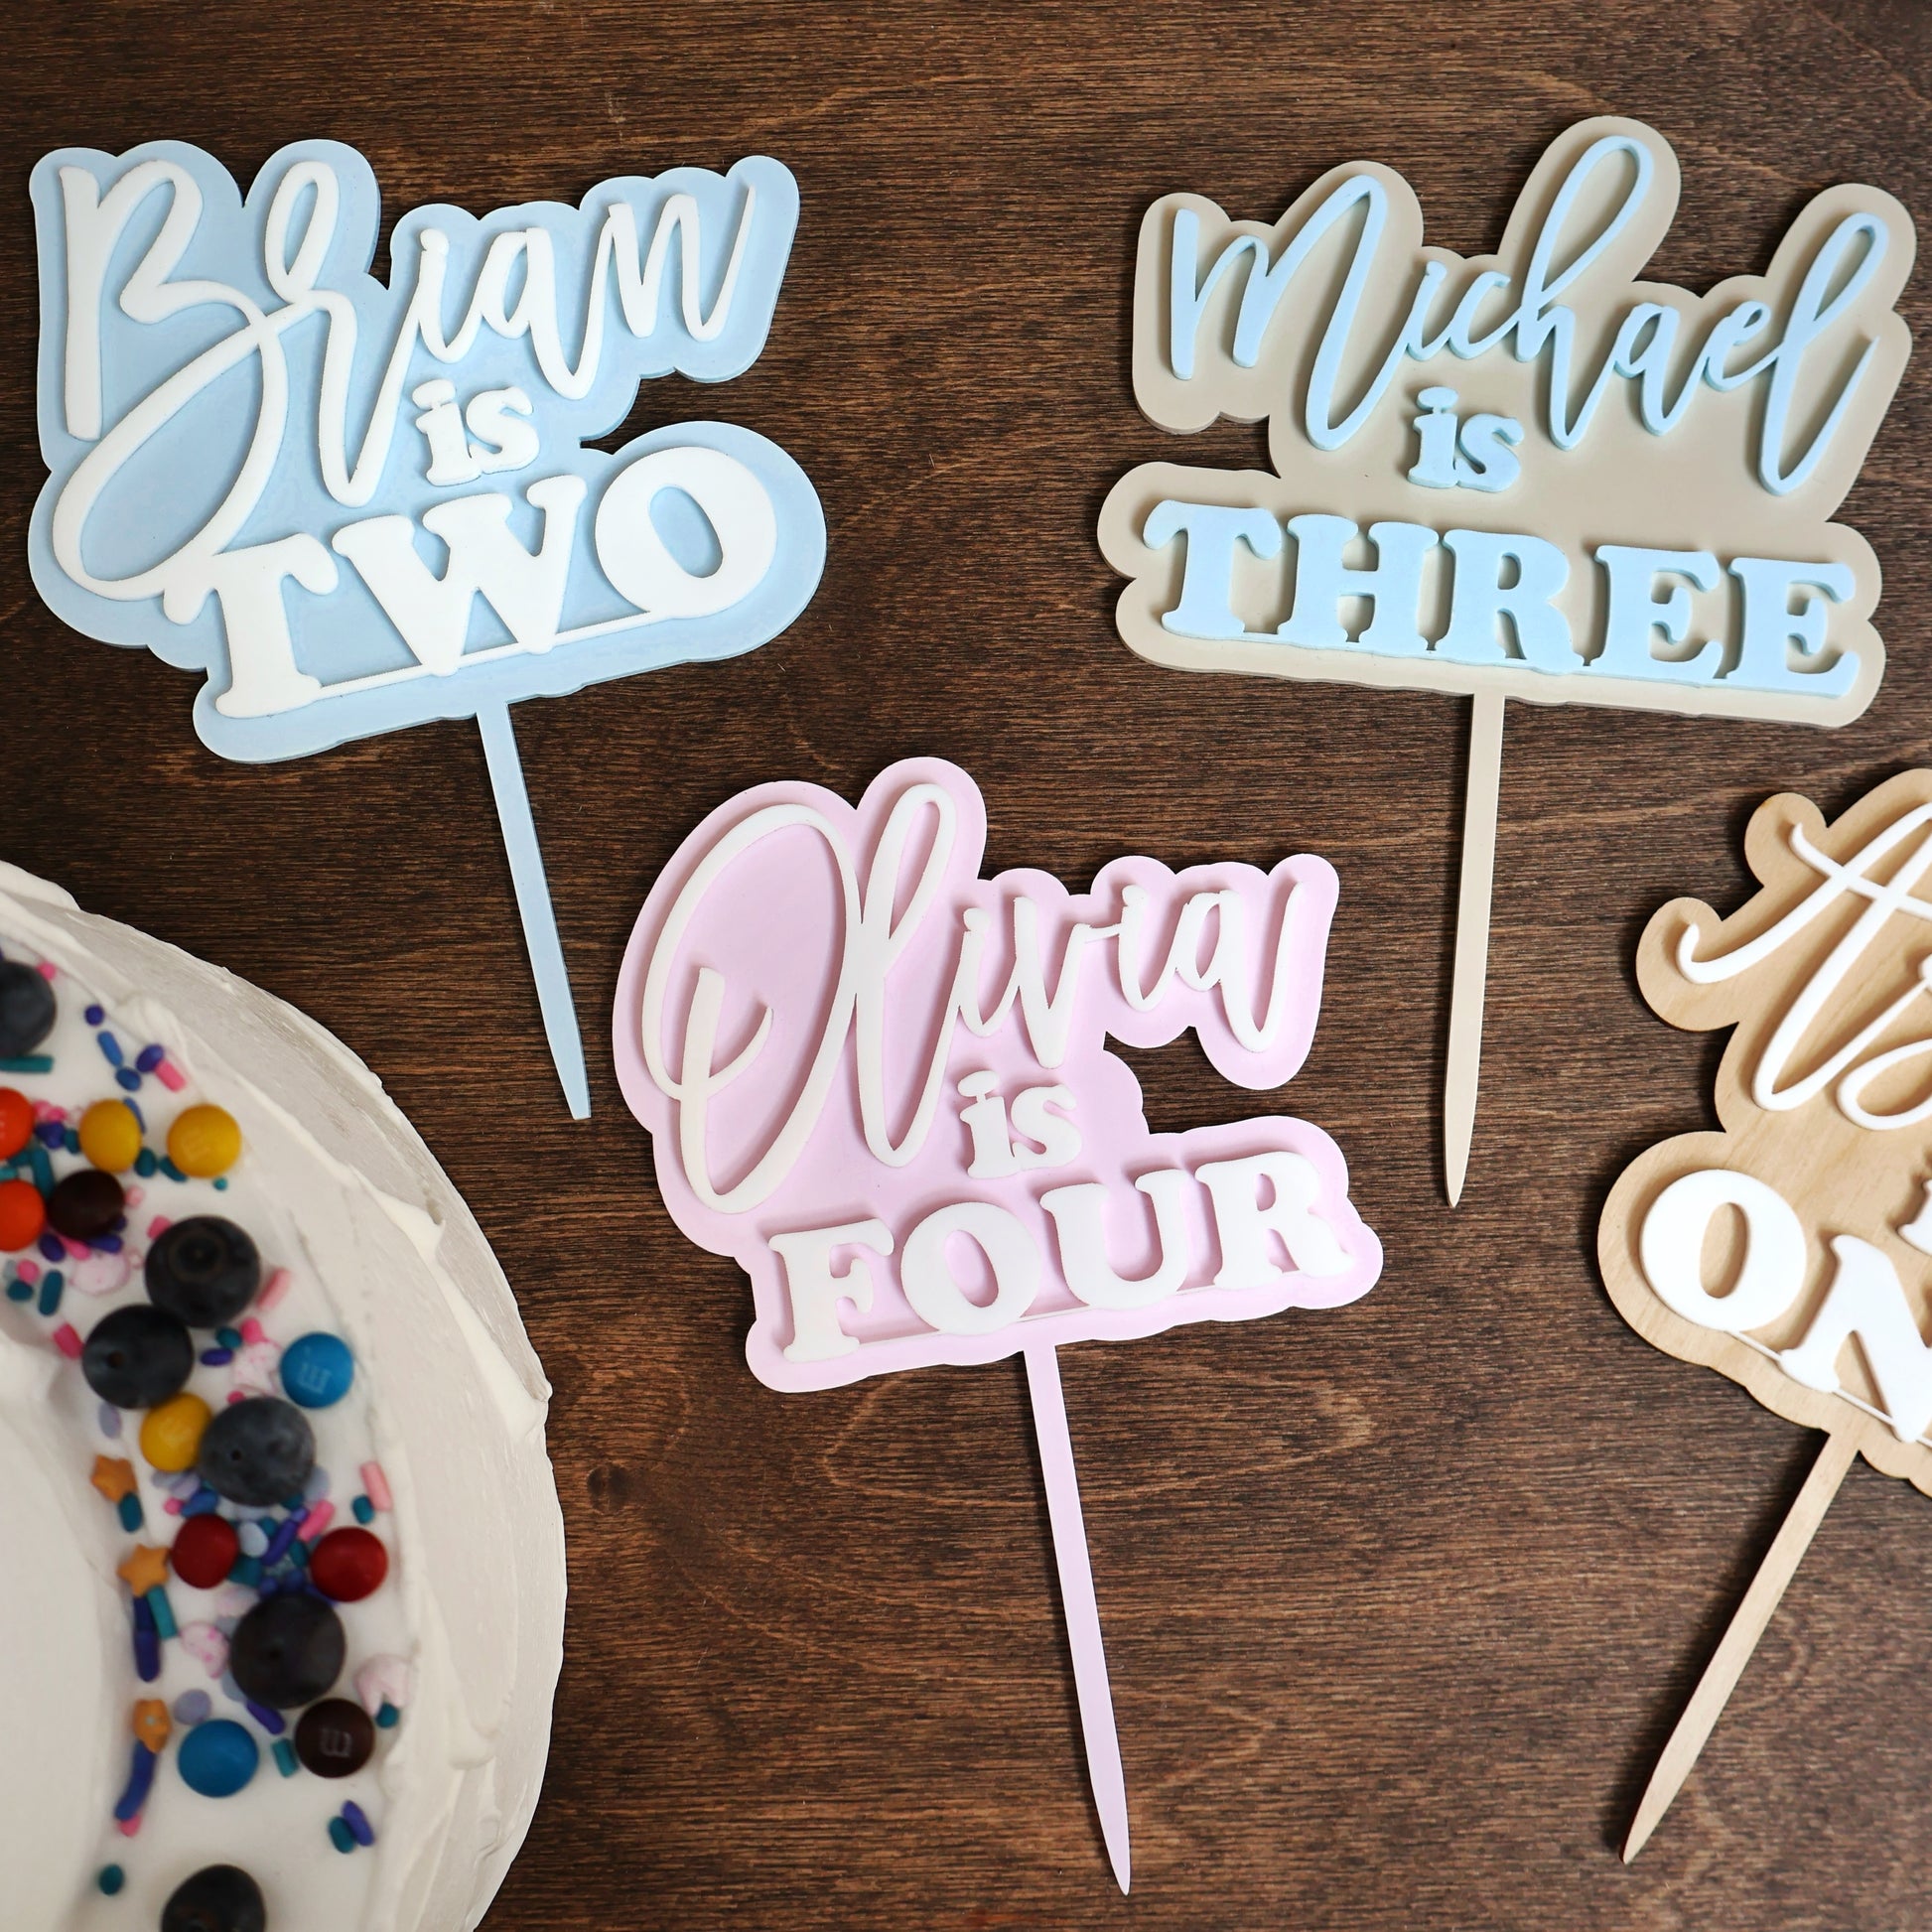 Double layer acrylic name number birthday cake topper 3d custom cake toppers wedding personalized acrylic cake toppers modern pastel acrylics mirrored acrylics wood candy bar names party decorations first birthday baptism cake bachelorette cake